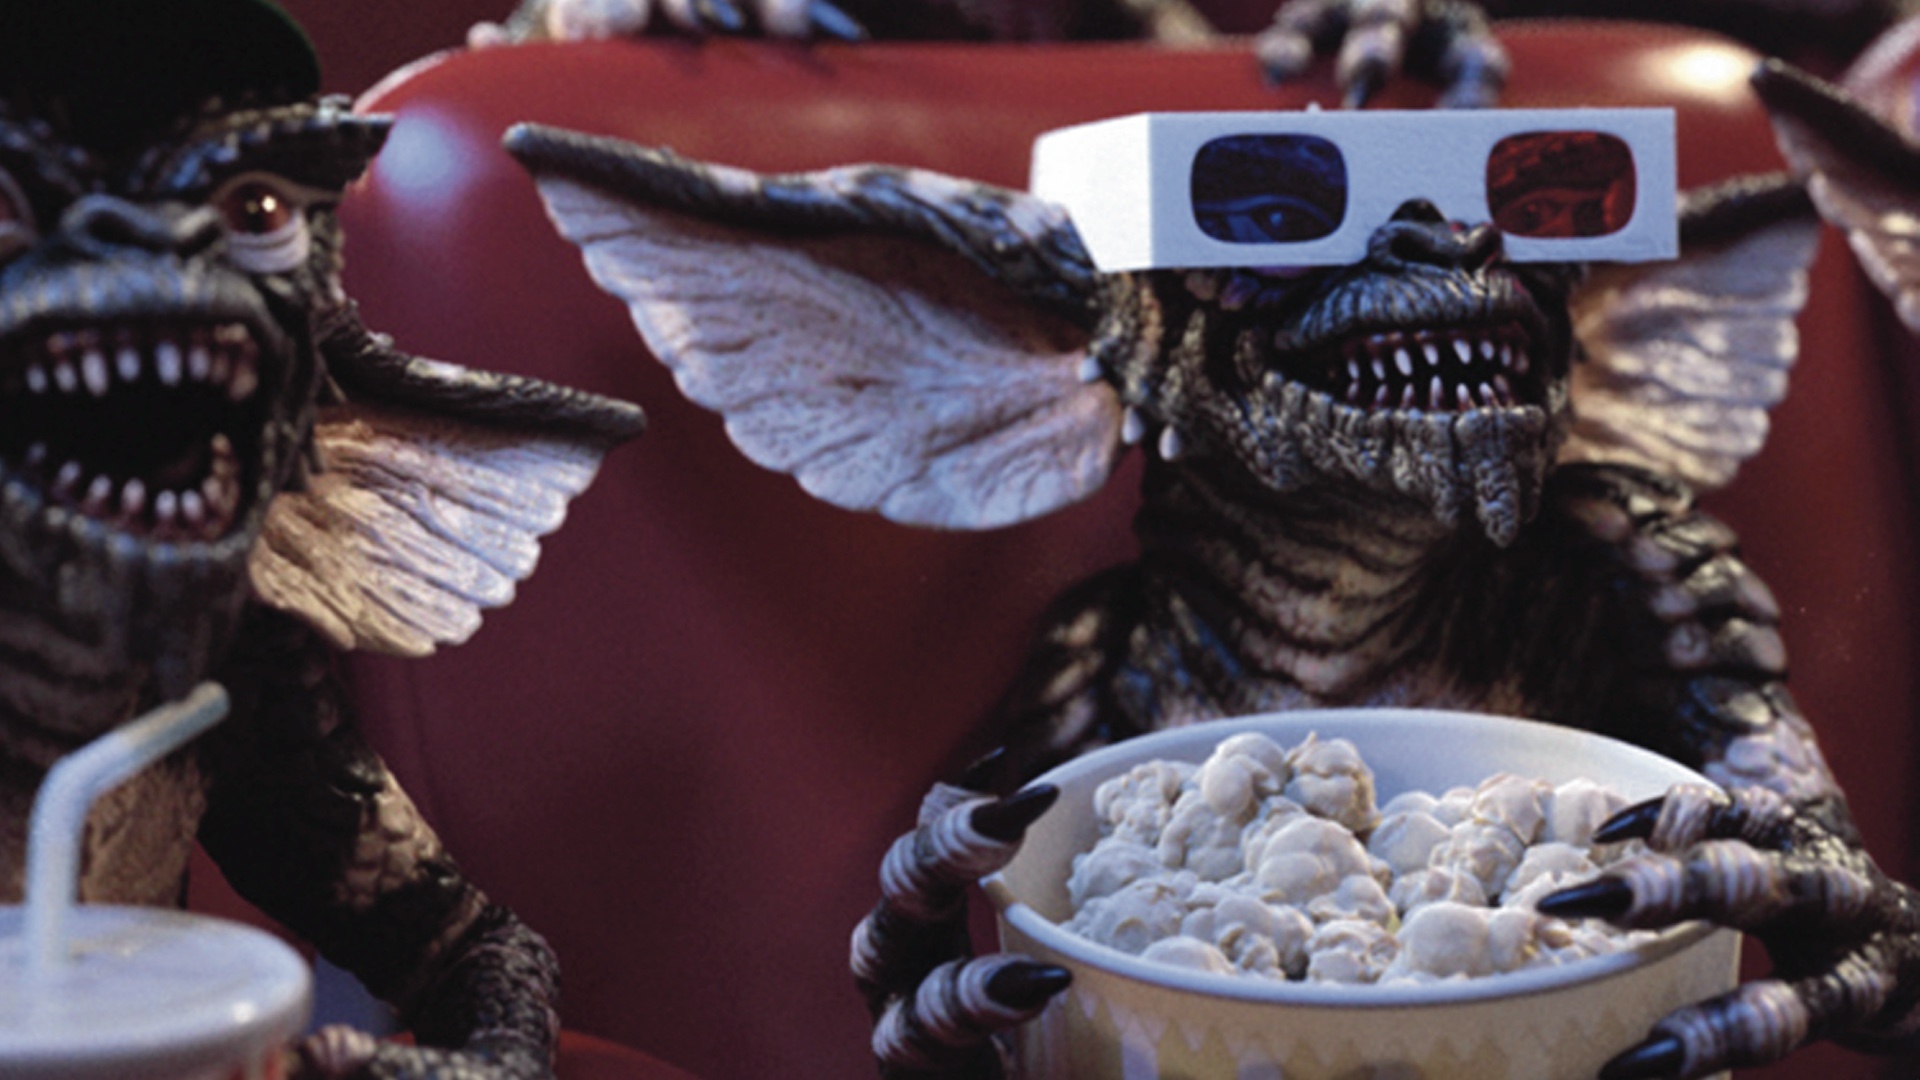 Gremlin: The film was theatrically released on June 8, 1984 by Warner Bros. 1920x1080 Full HD Wallpaper.